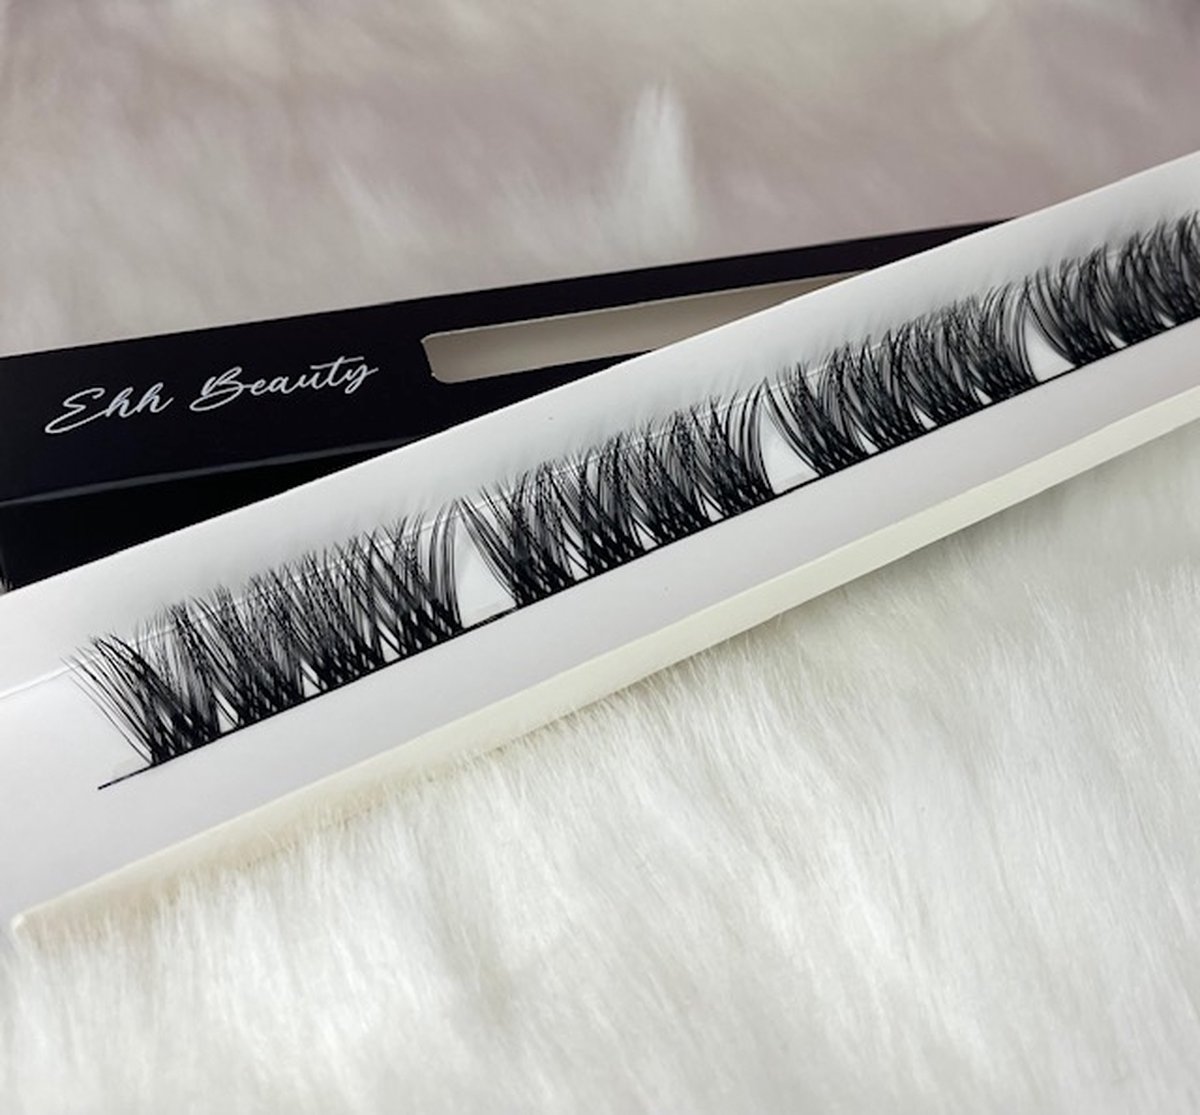 EHHbeauty - Wimpers - Wimperextensions - Cluster - Lashes - Naturel - 16mm - Diy lashes - Stukjes wimper